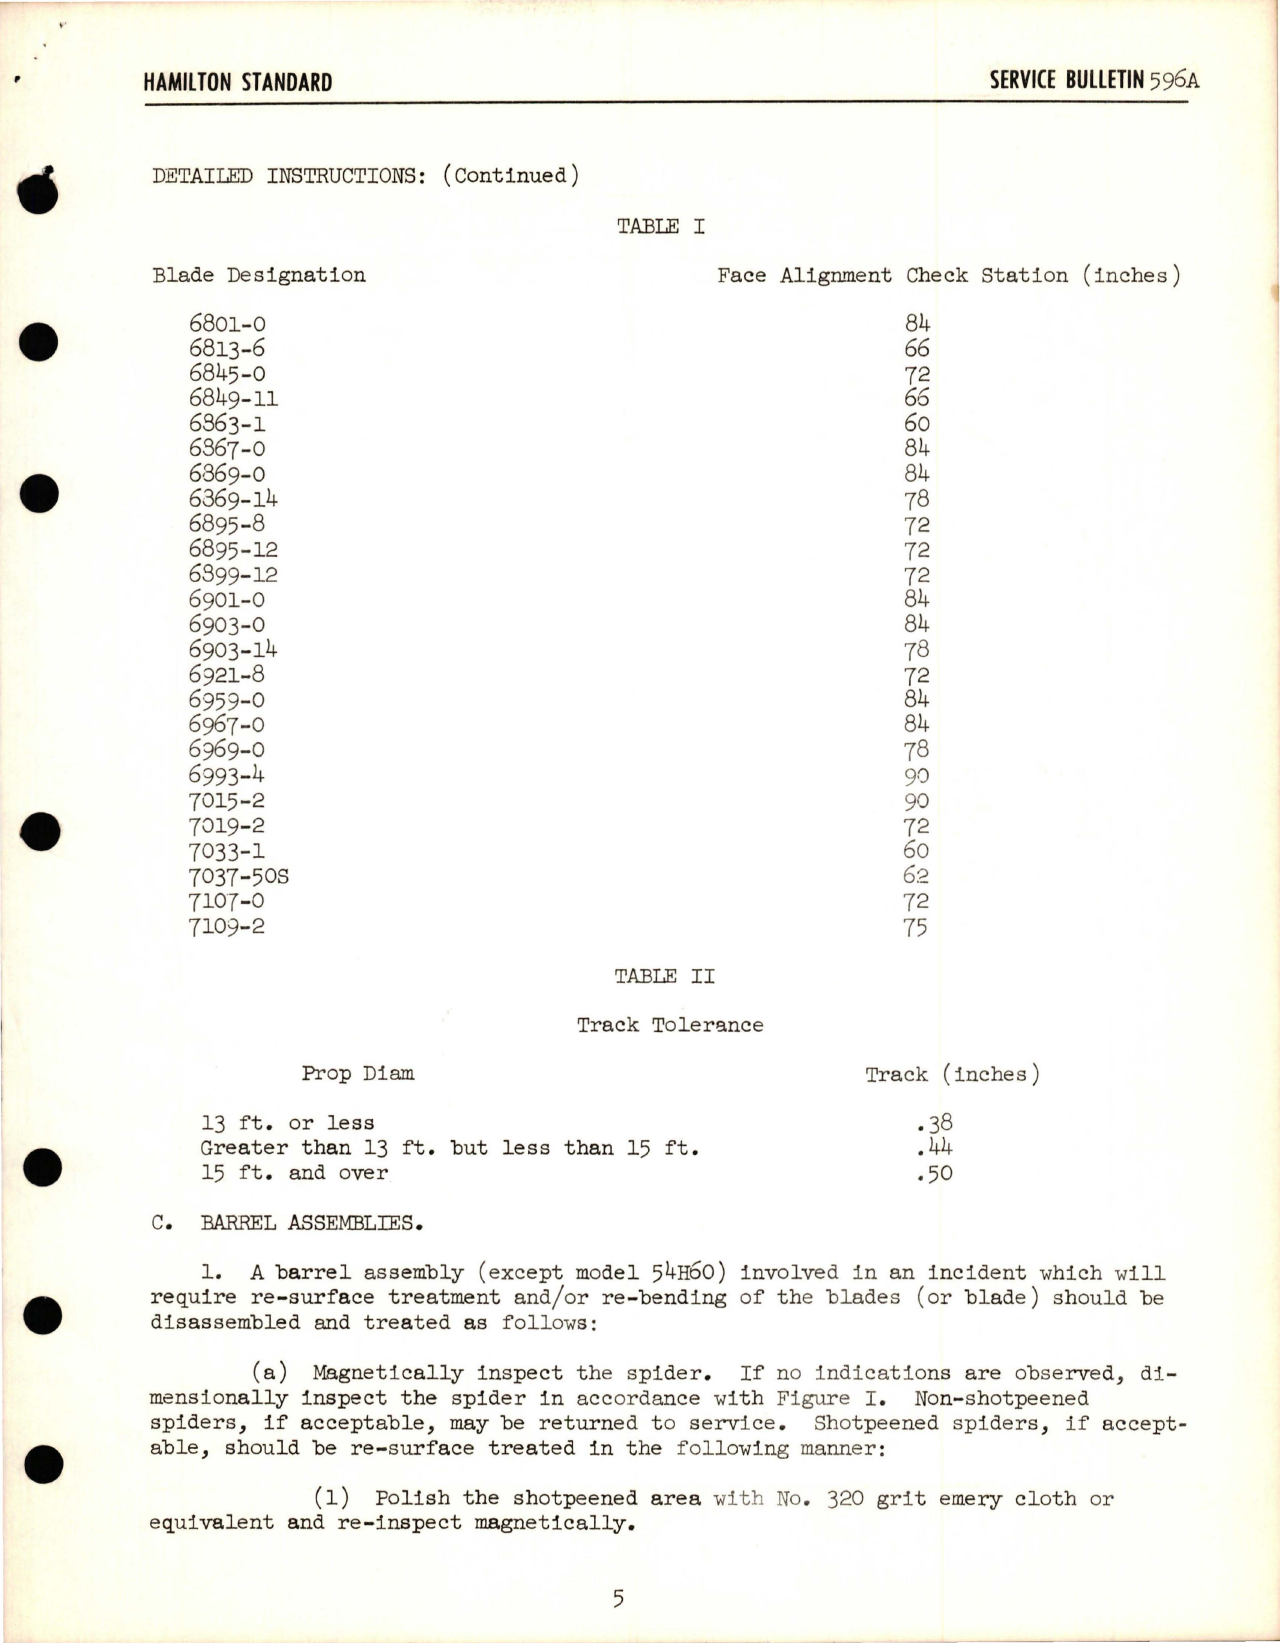 Sample page 5 from AirCorps Library document: Disposition of Aluminum Bladed Propellers Having Experienced Impact